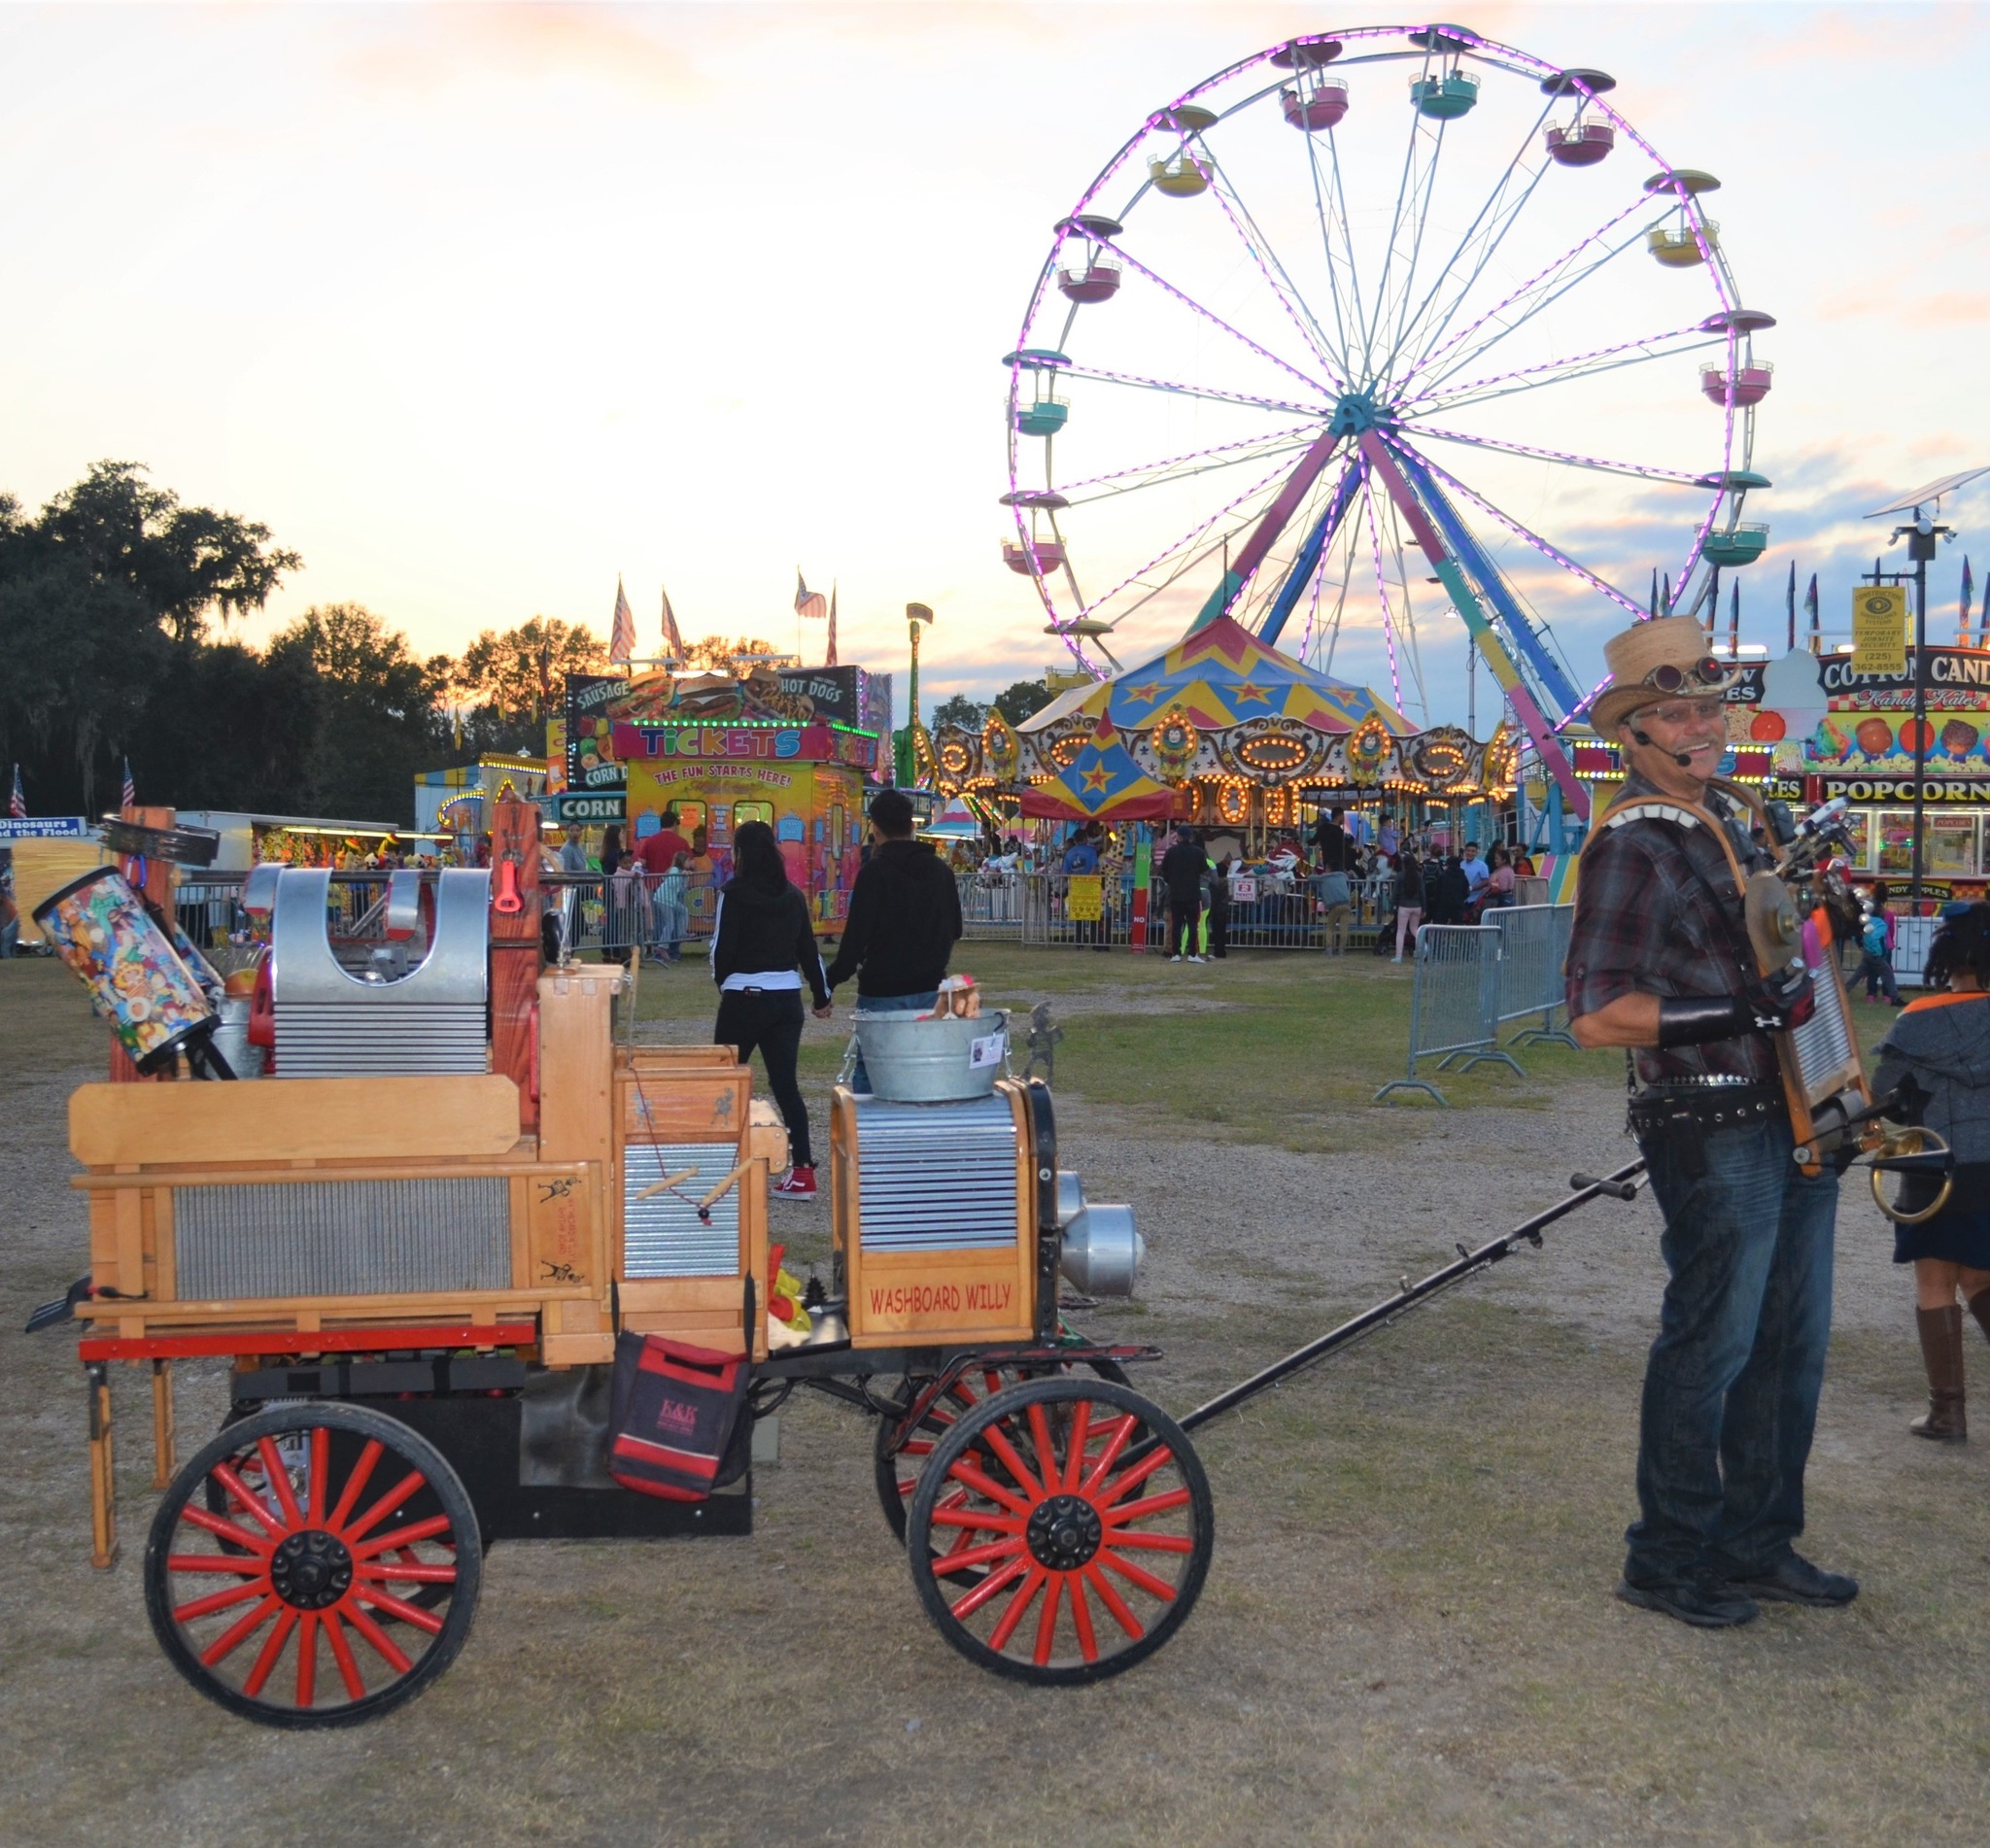 The Oldest County Fair In Oregon Is Just A Few Days Away!